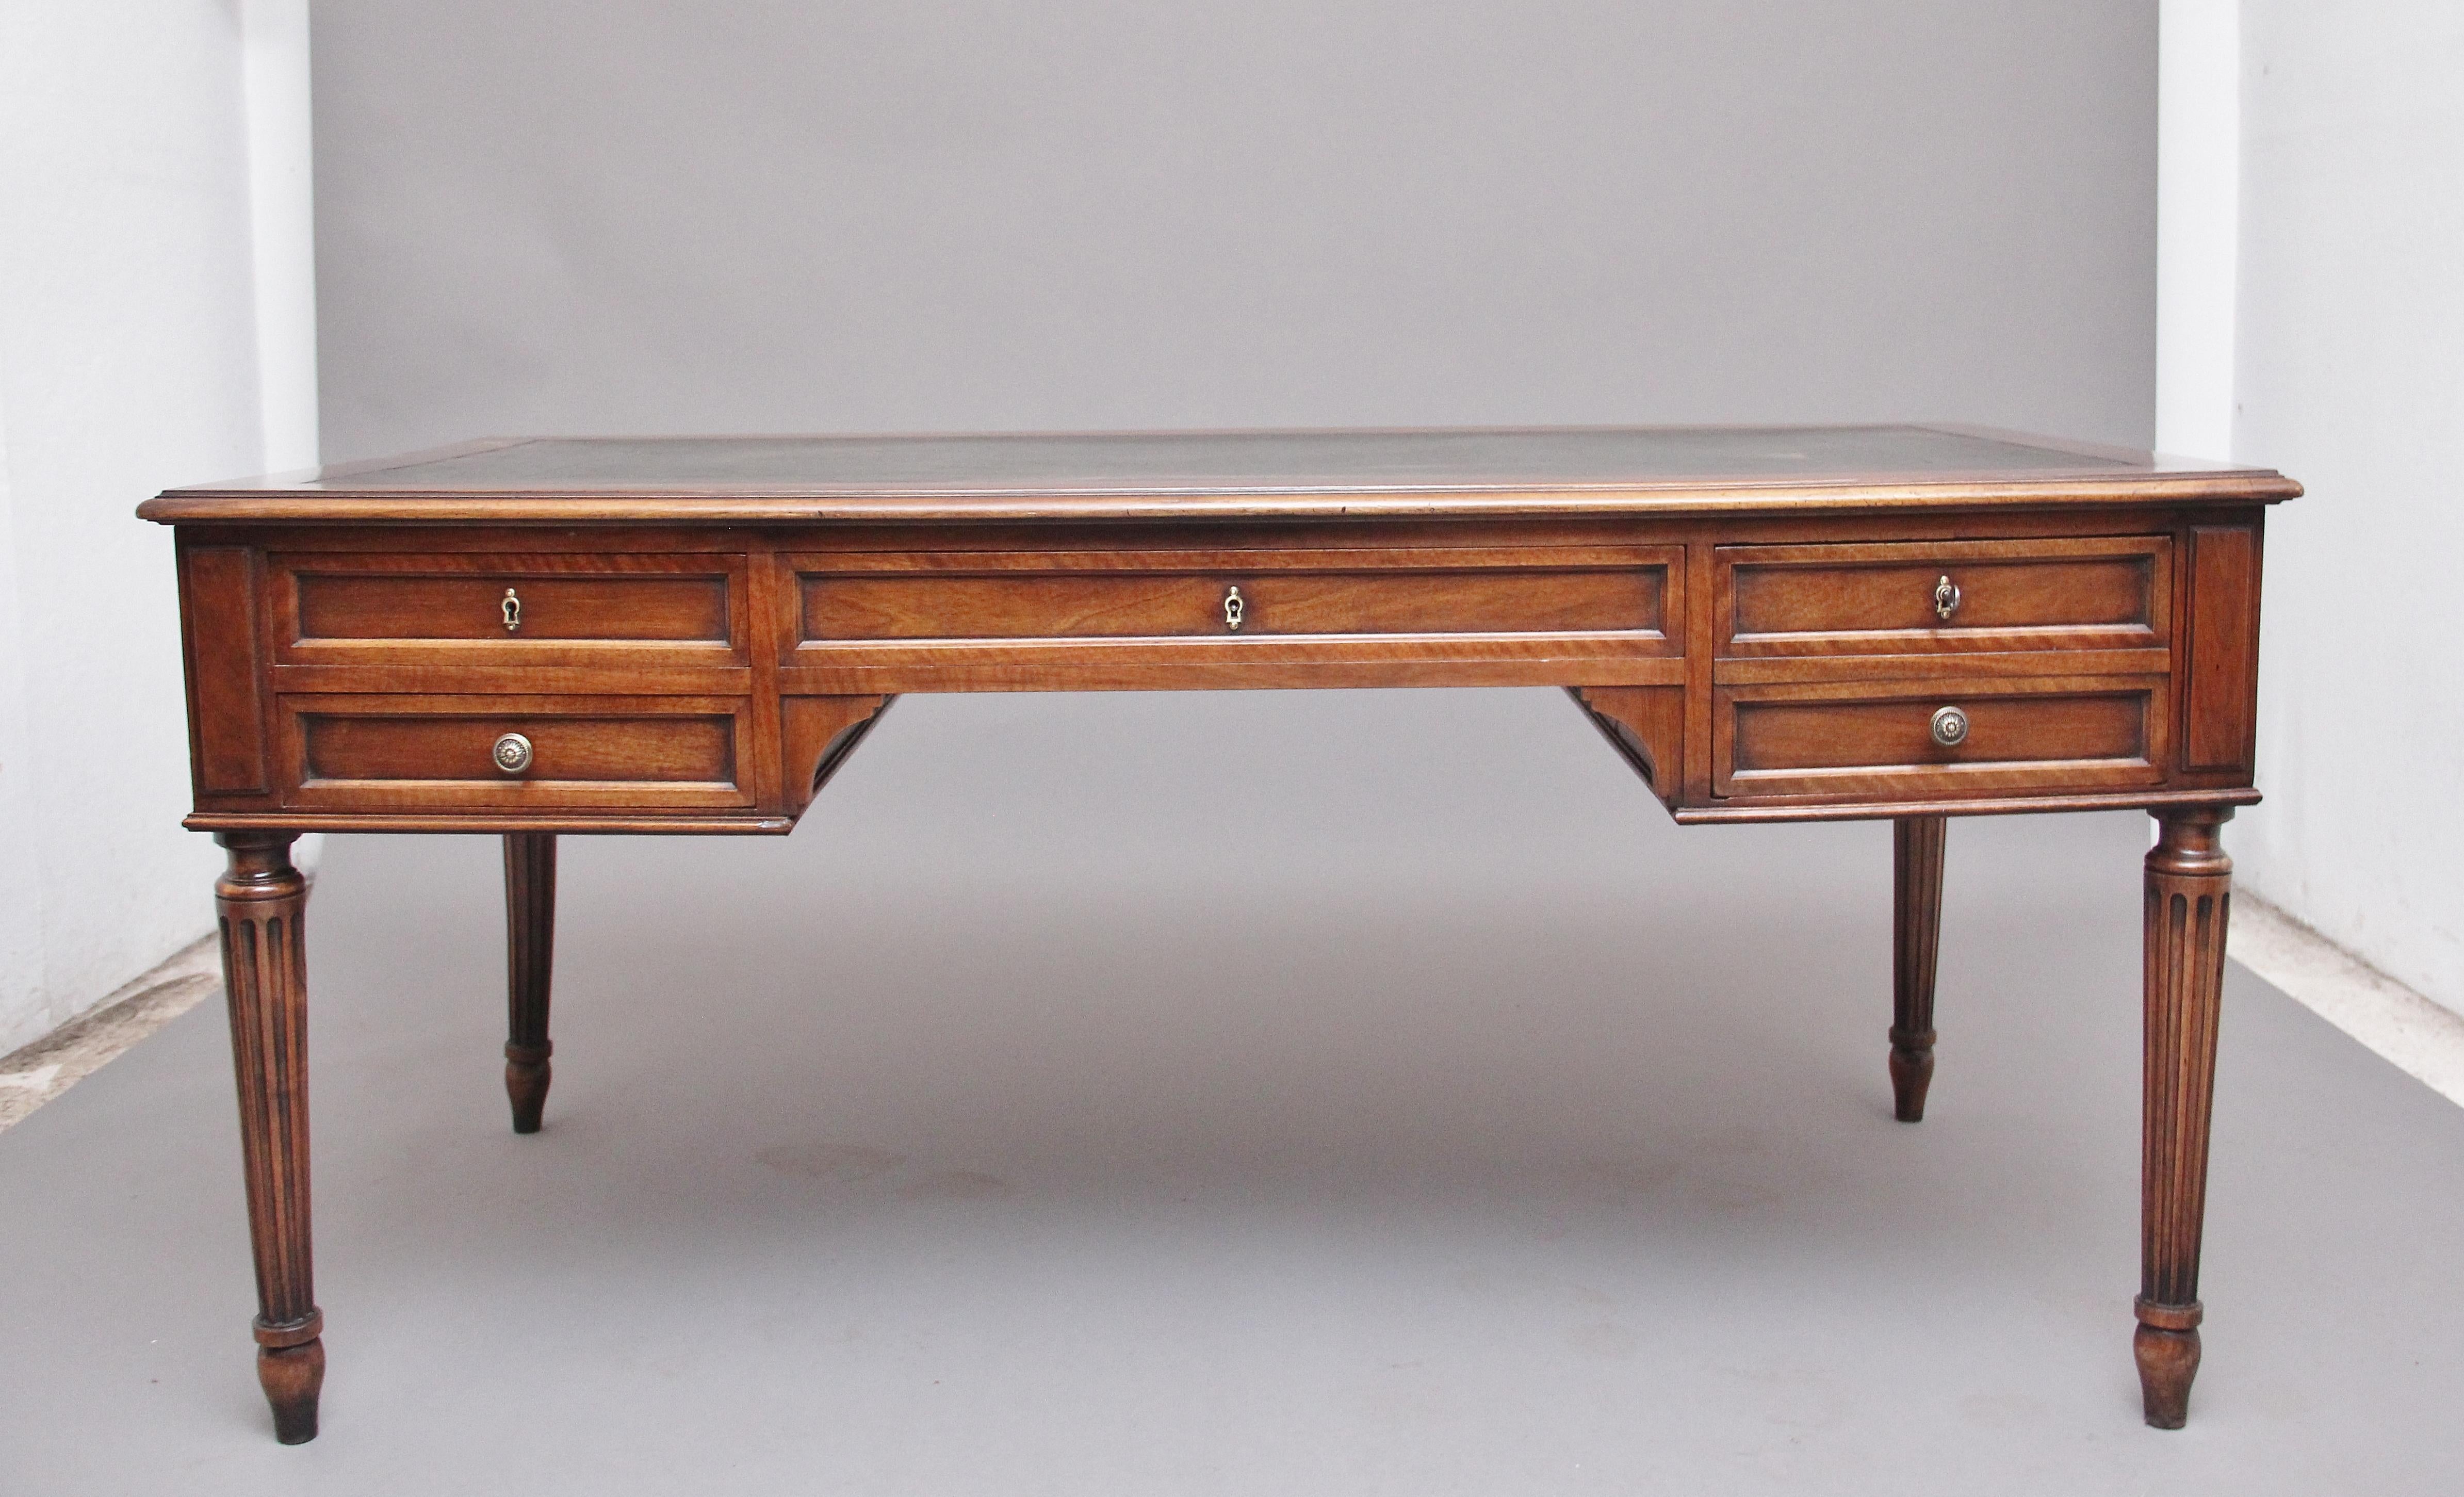 19th century French walnut writing table, the moulded edge top having a green leather writing surface decorated with gold and blind tooling, each end of the table having pull out slides, the front of the table there are a combination of four oak